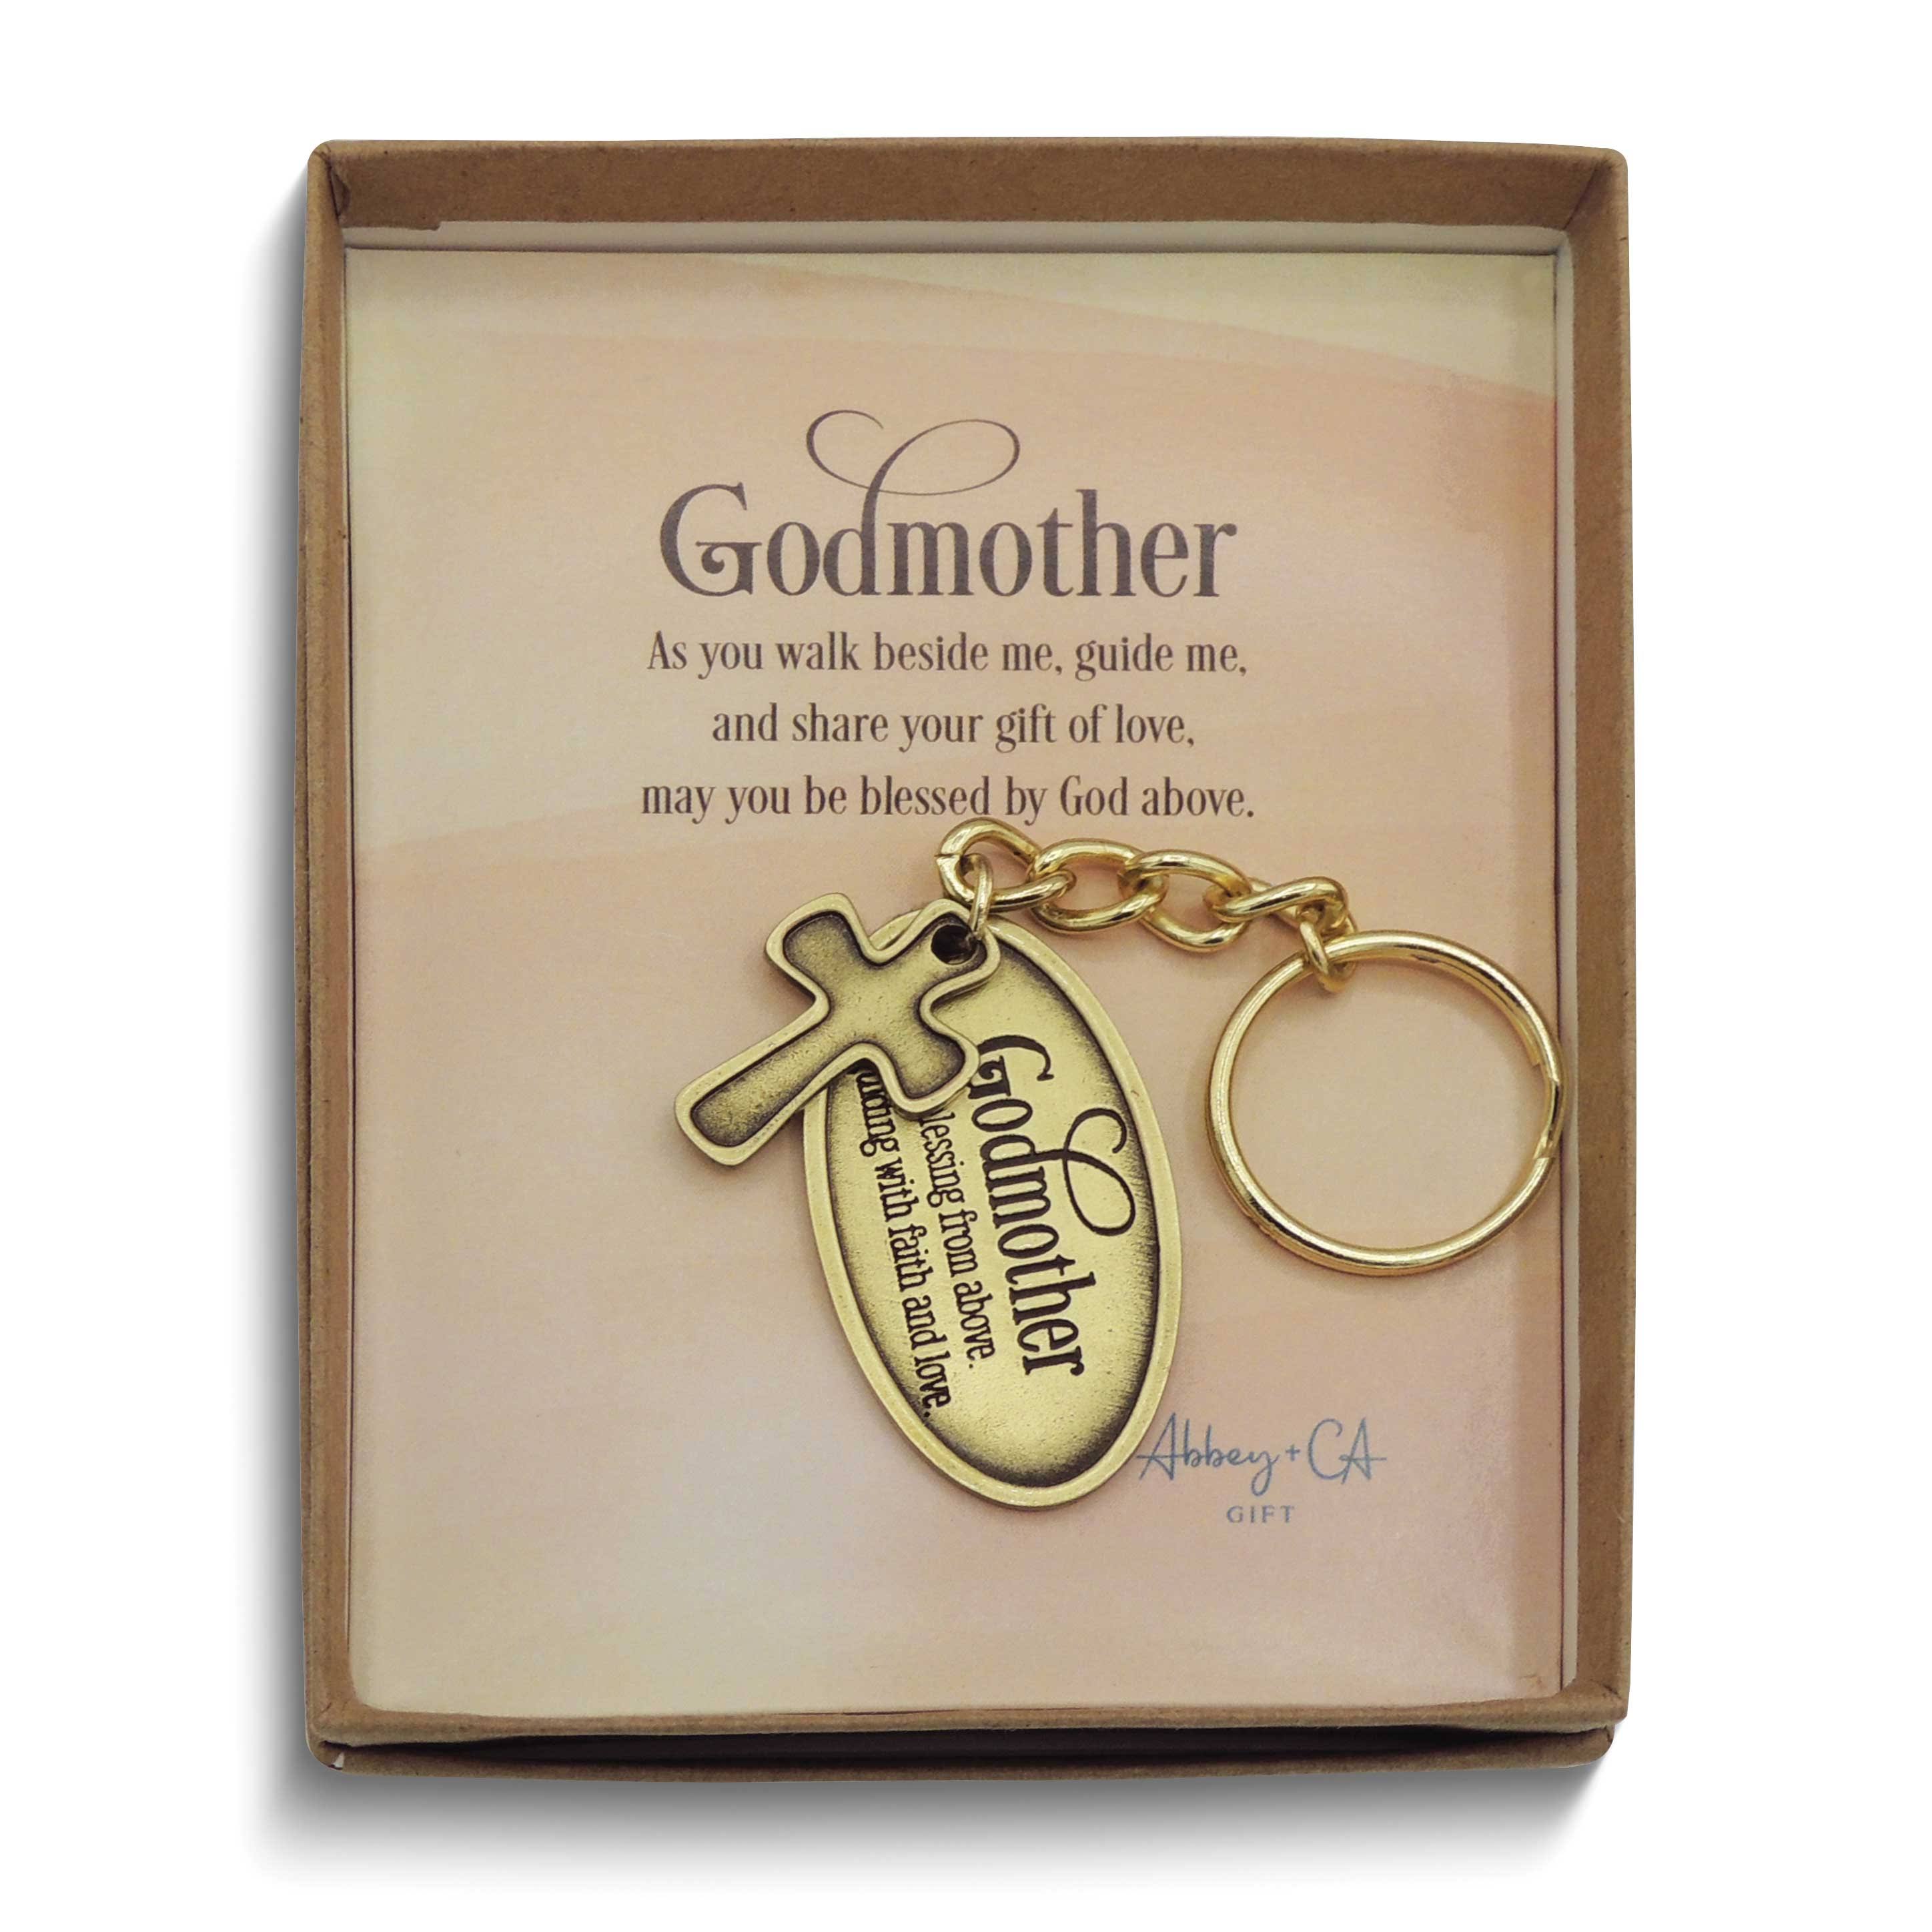 Bello Gifts Godmother Key Ring with Cross